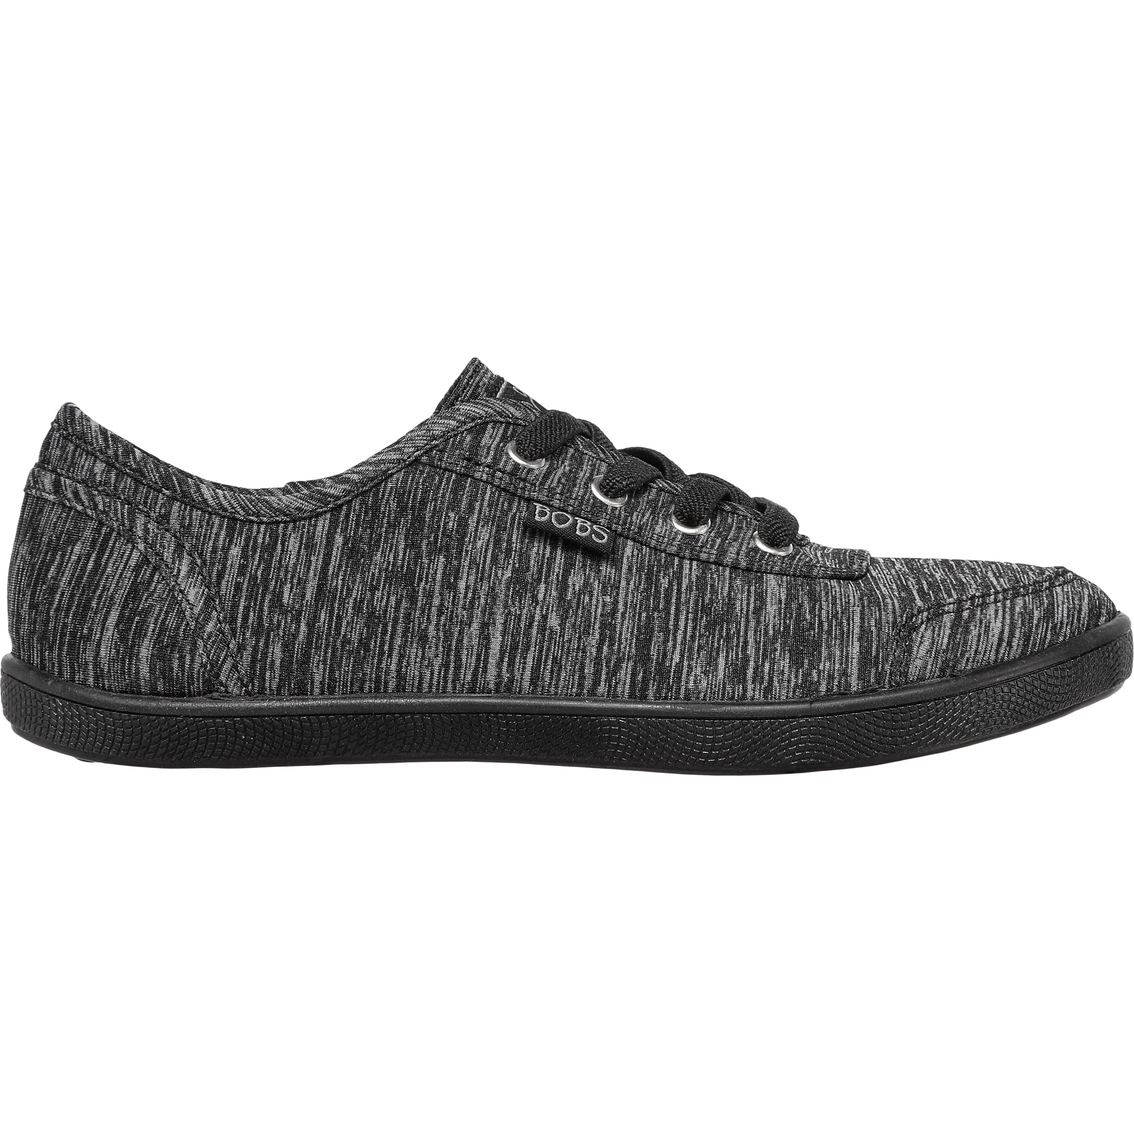 BOBS from Skechers Women's BOBS B Cute Fresh Times Shoes - Image 2 of 5